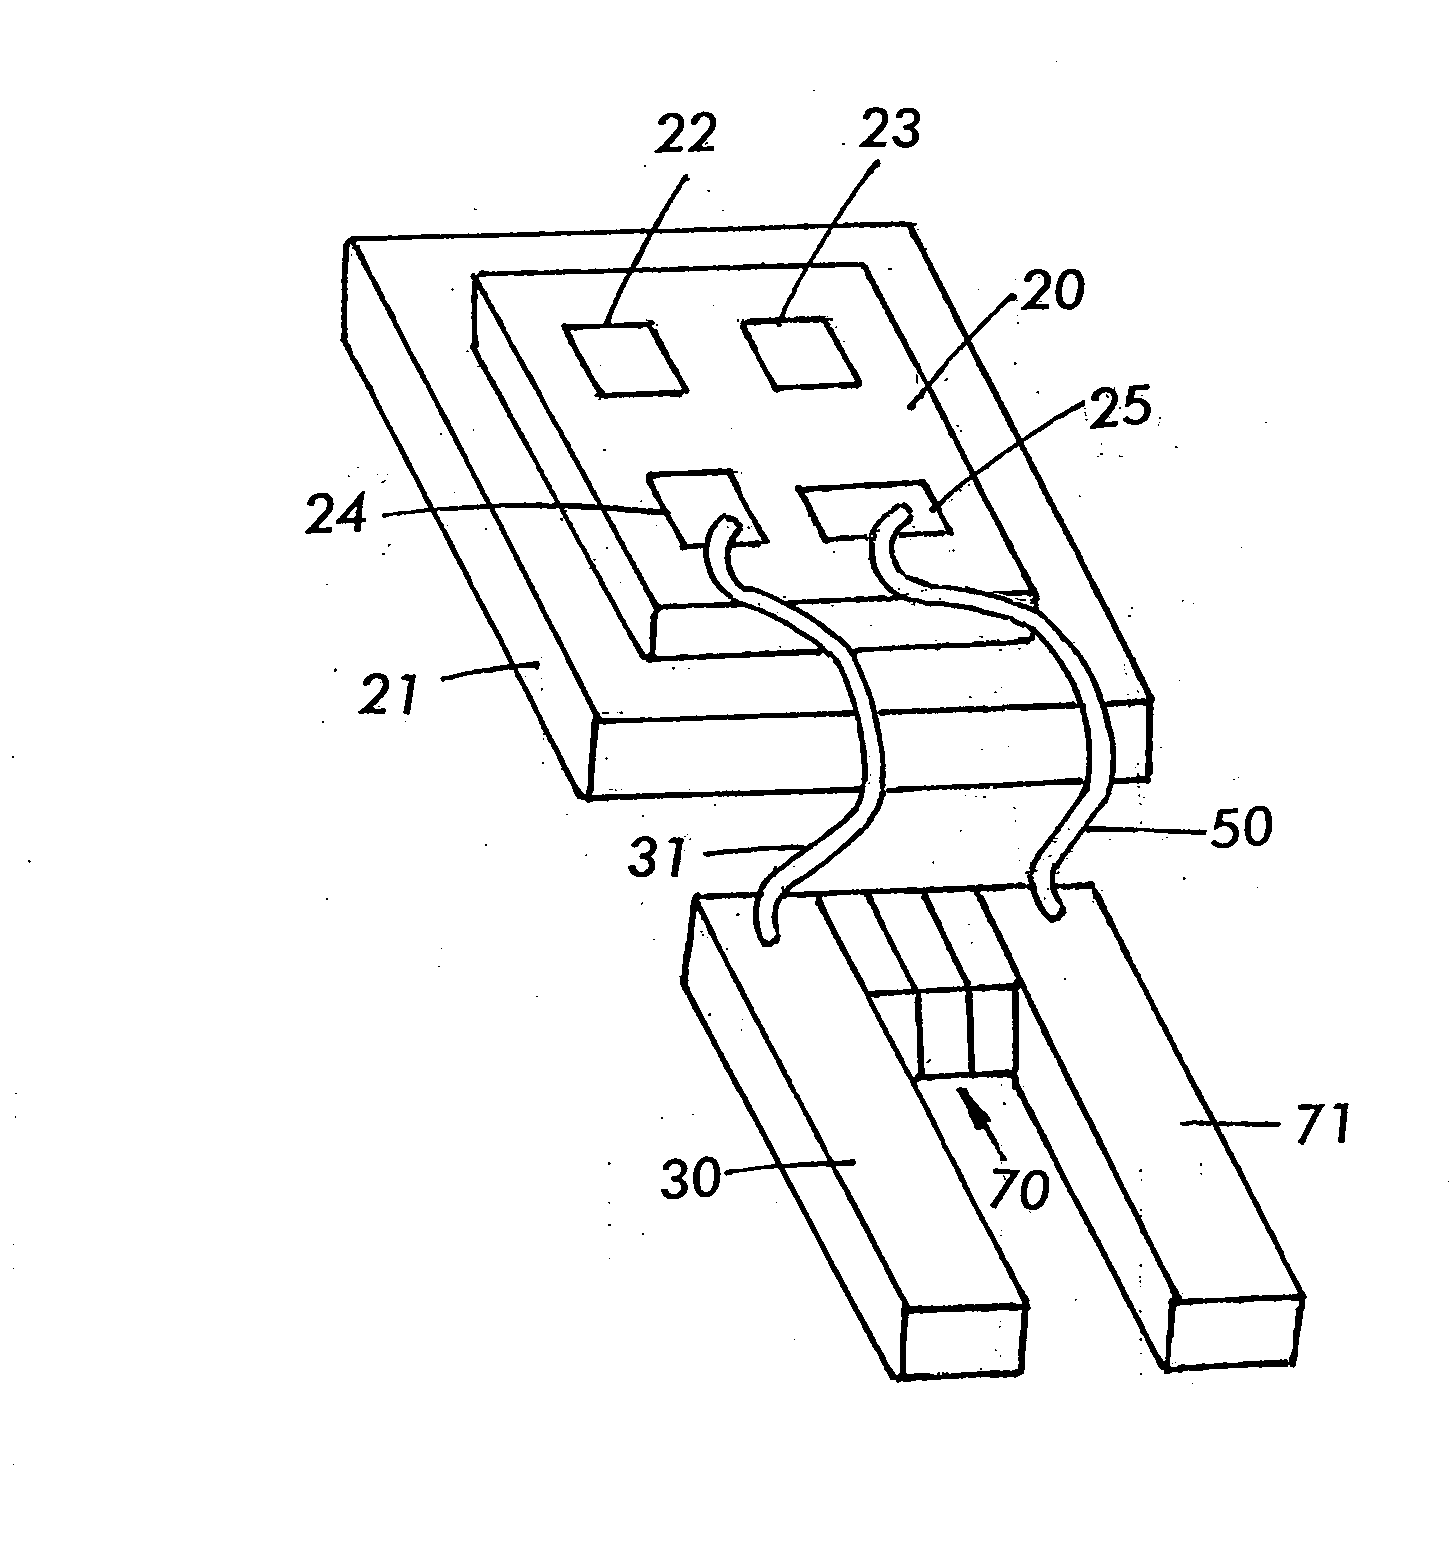 Semiconductor device package with internal device protection